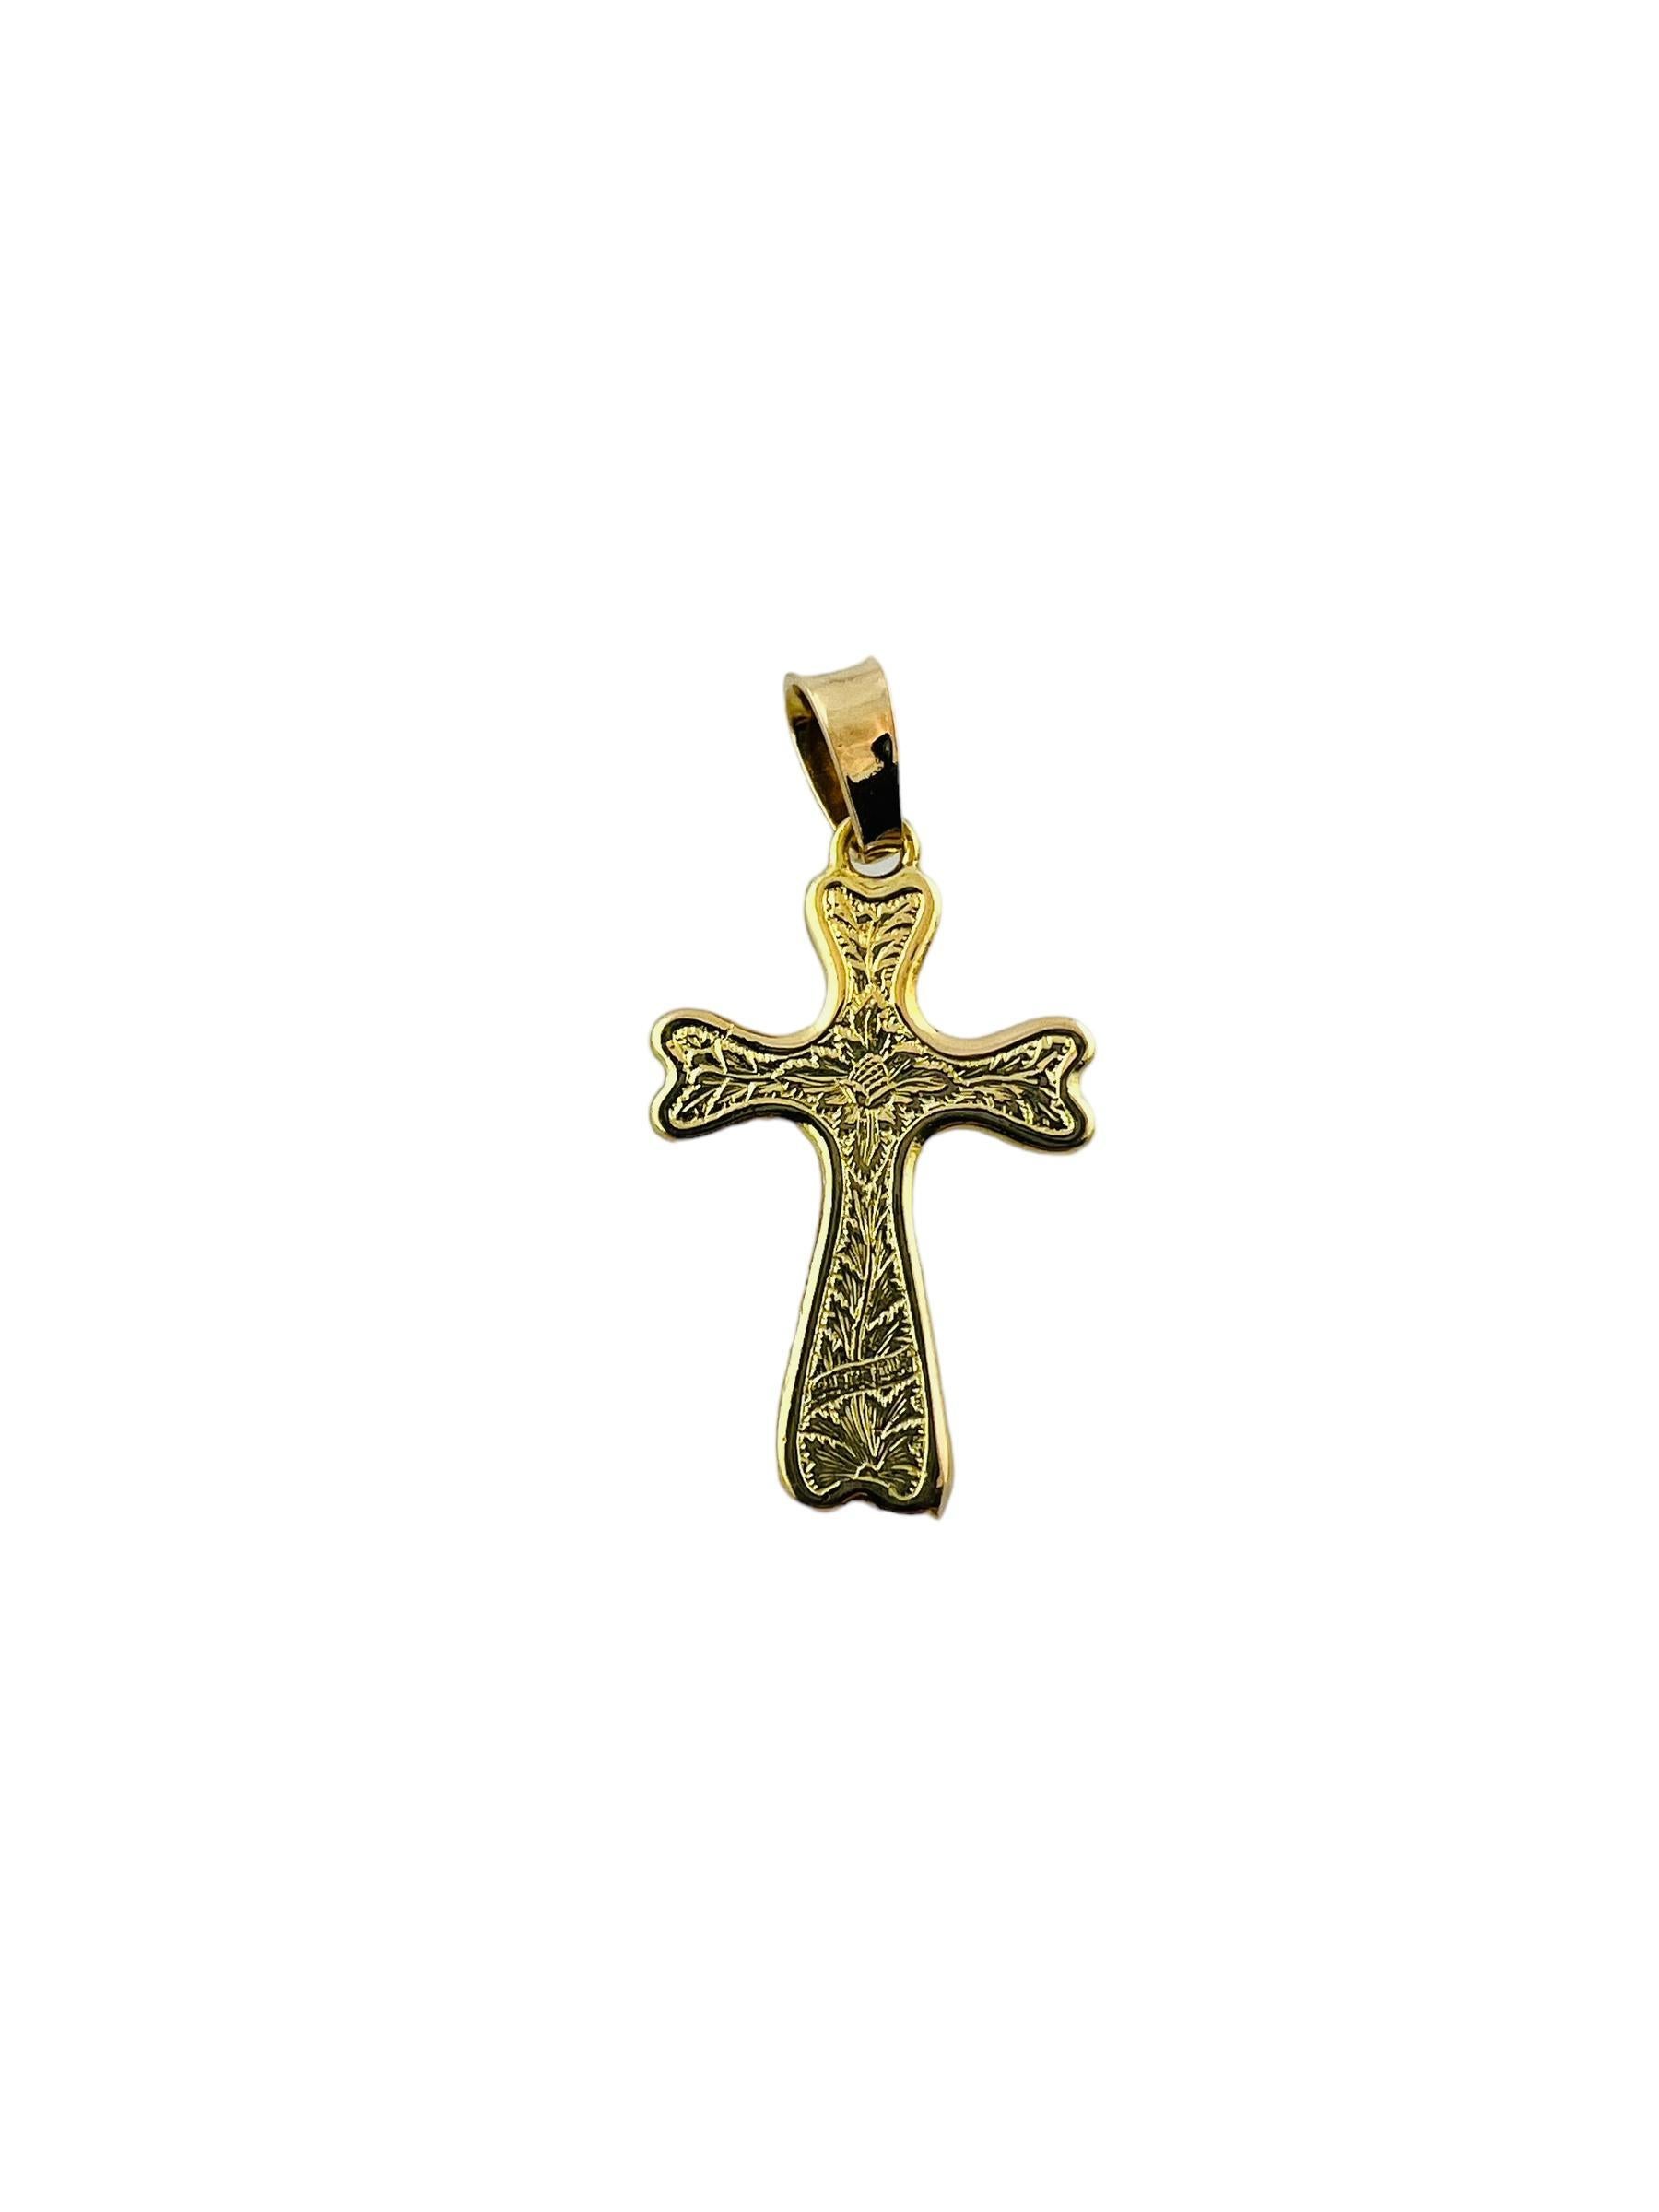 18K Yellow Gold Crucifix Cross Pendant

This lovely crucifix pendant is set in 18K Yellow Gold

Pendant measures approx. 28.1 mm x 18.2mm x 2.8 mm

2.8 g / 1.8 dwt

Stamped 750

*Does not come with chain*

Very good preowned condition. 

Will be